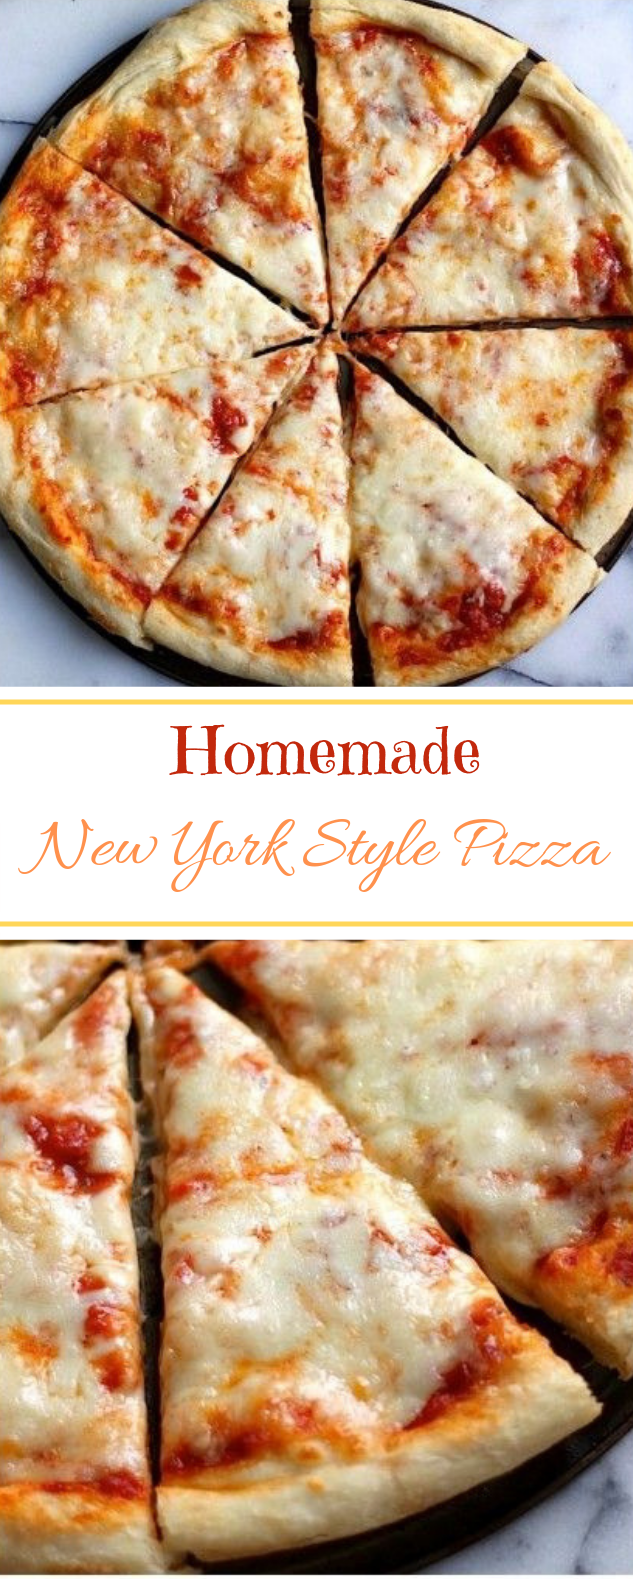 The Best New York Style Cheese Pizza #homemade #pizza